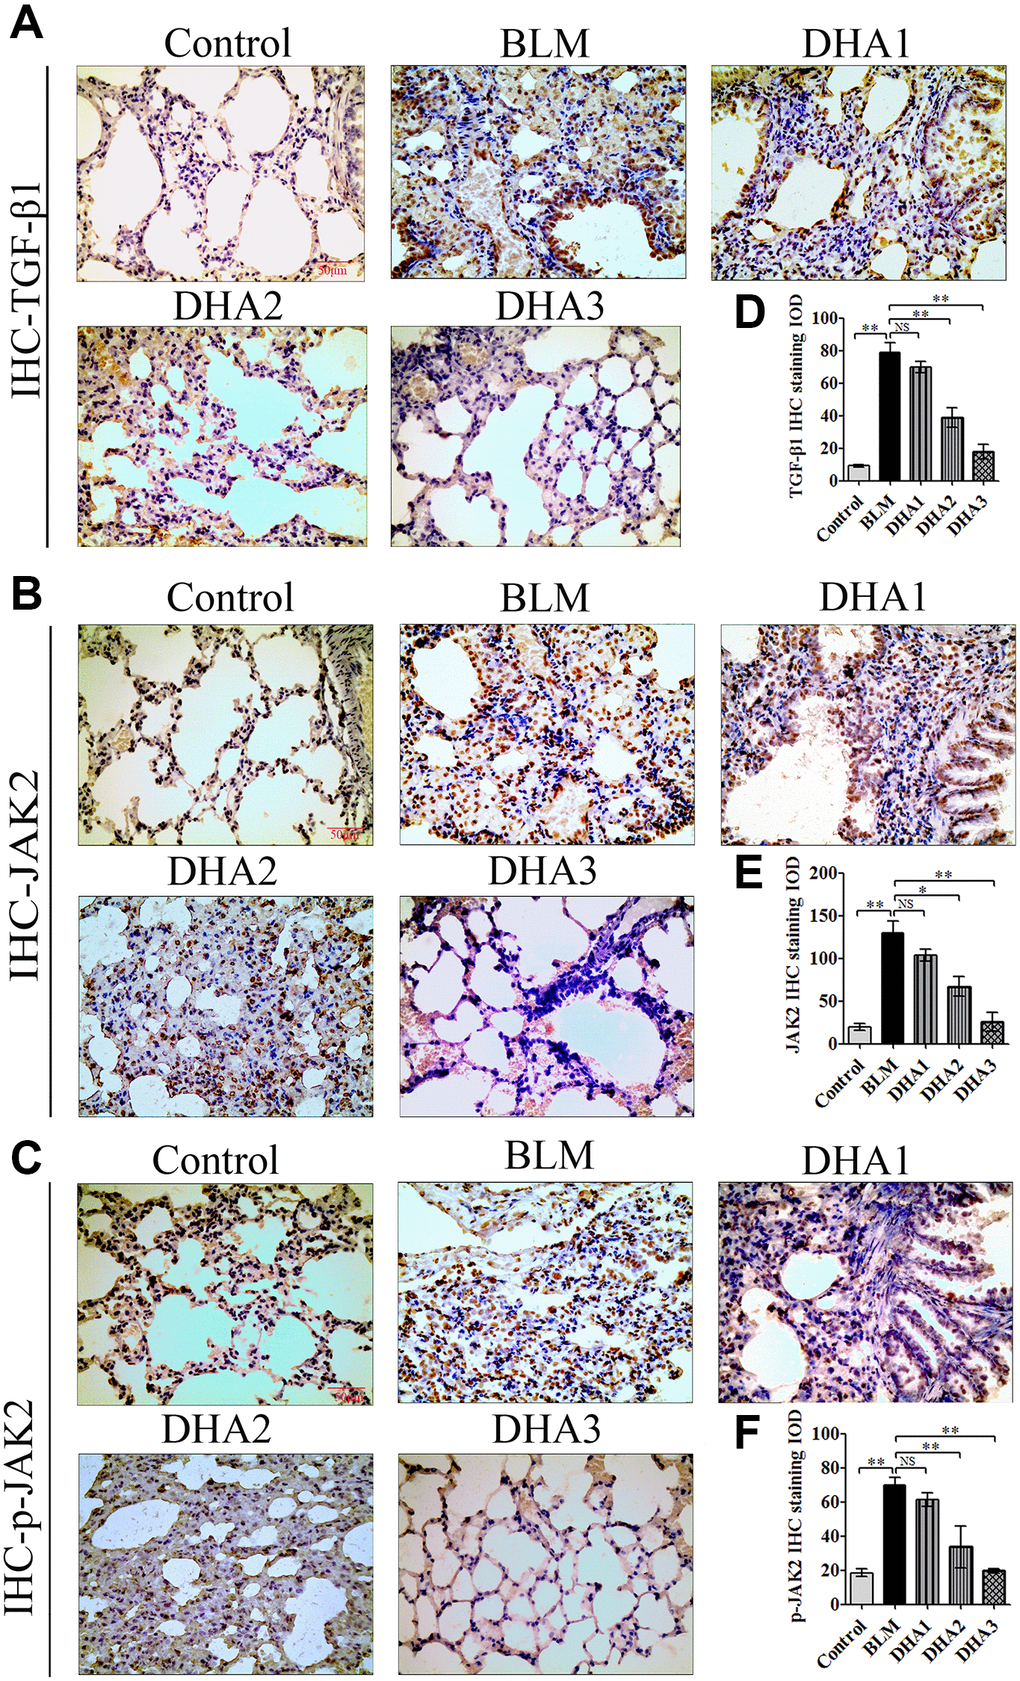 DHA inhibited pulmonary fibrosis via the JAK2/STAT3 pathway (A) Representative images of (A) TGF-β1, (B) JAK2, and (C) p-JAK2 proteins in lung tissues, detected using IHC. Mean IOD of (D) TGF-β1, (E) JAK2, and (F) p-JAK2 IHC staining. Data are expressed as the means ± standard error. *P **P 